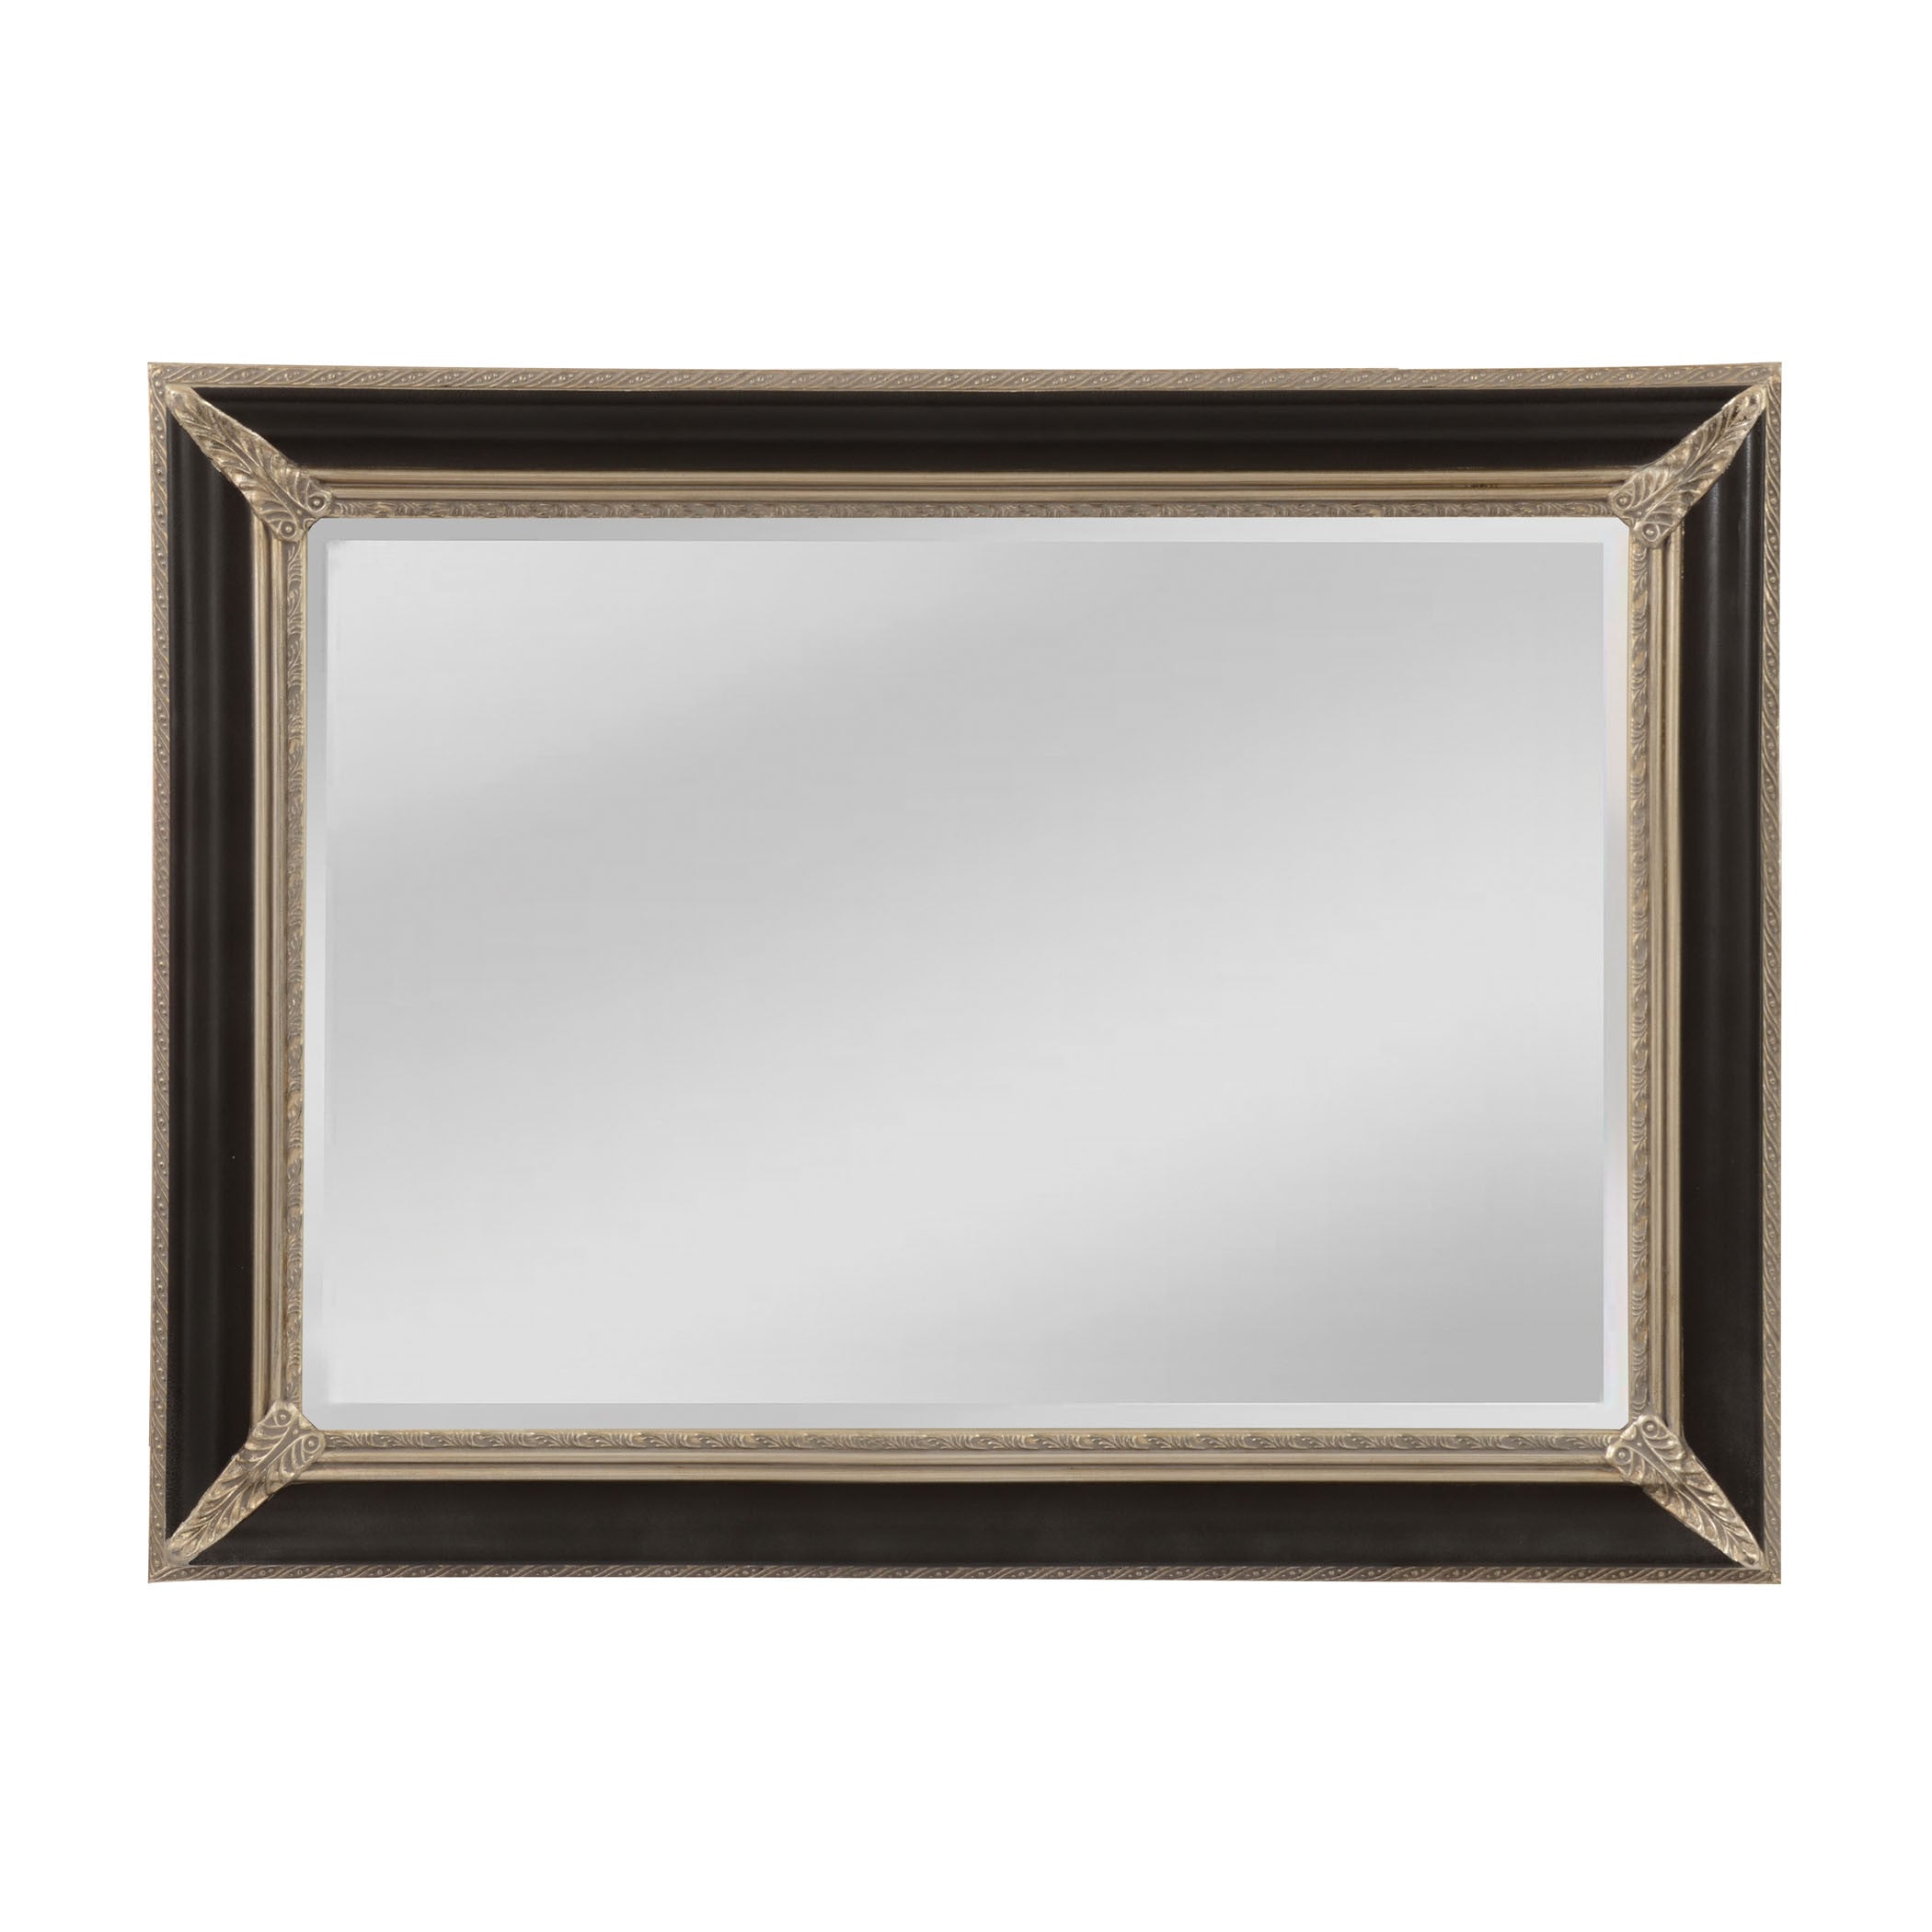 Mirror Masters Mw5800c-0044 Kingsdale Collection Aged Sterling,ebony Crackle Finish Wall Mirror